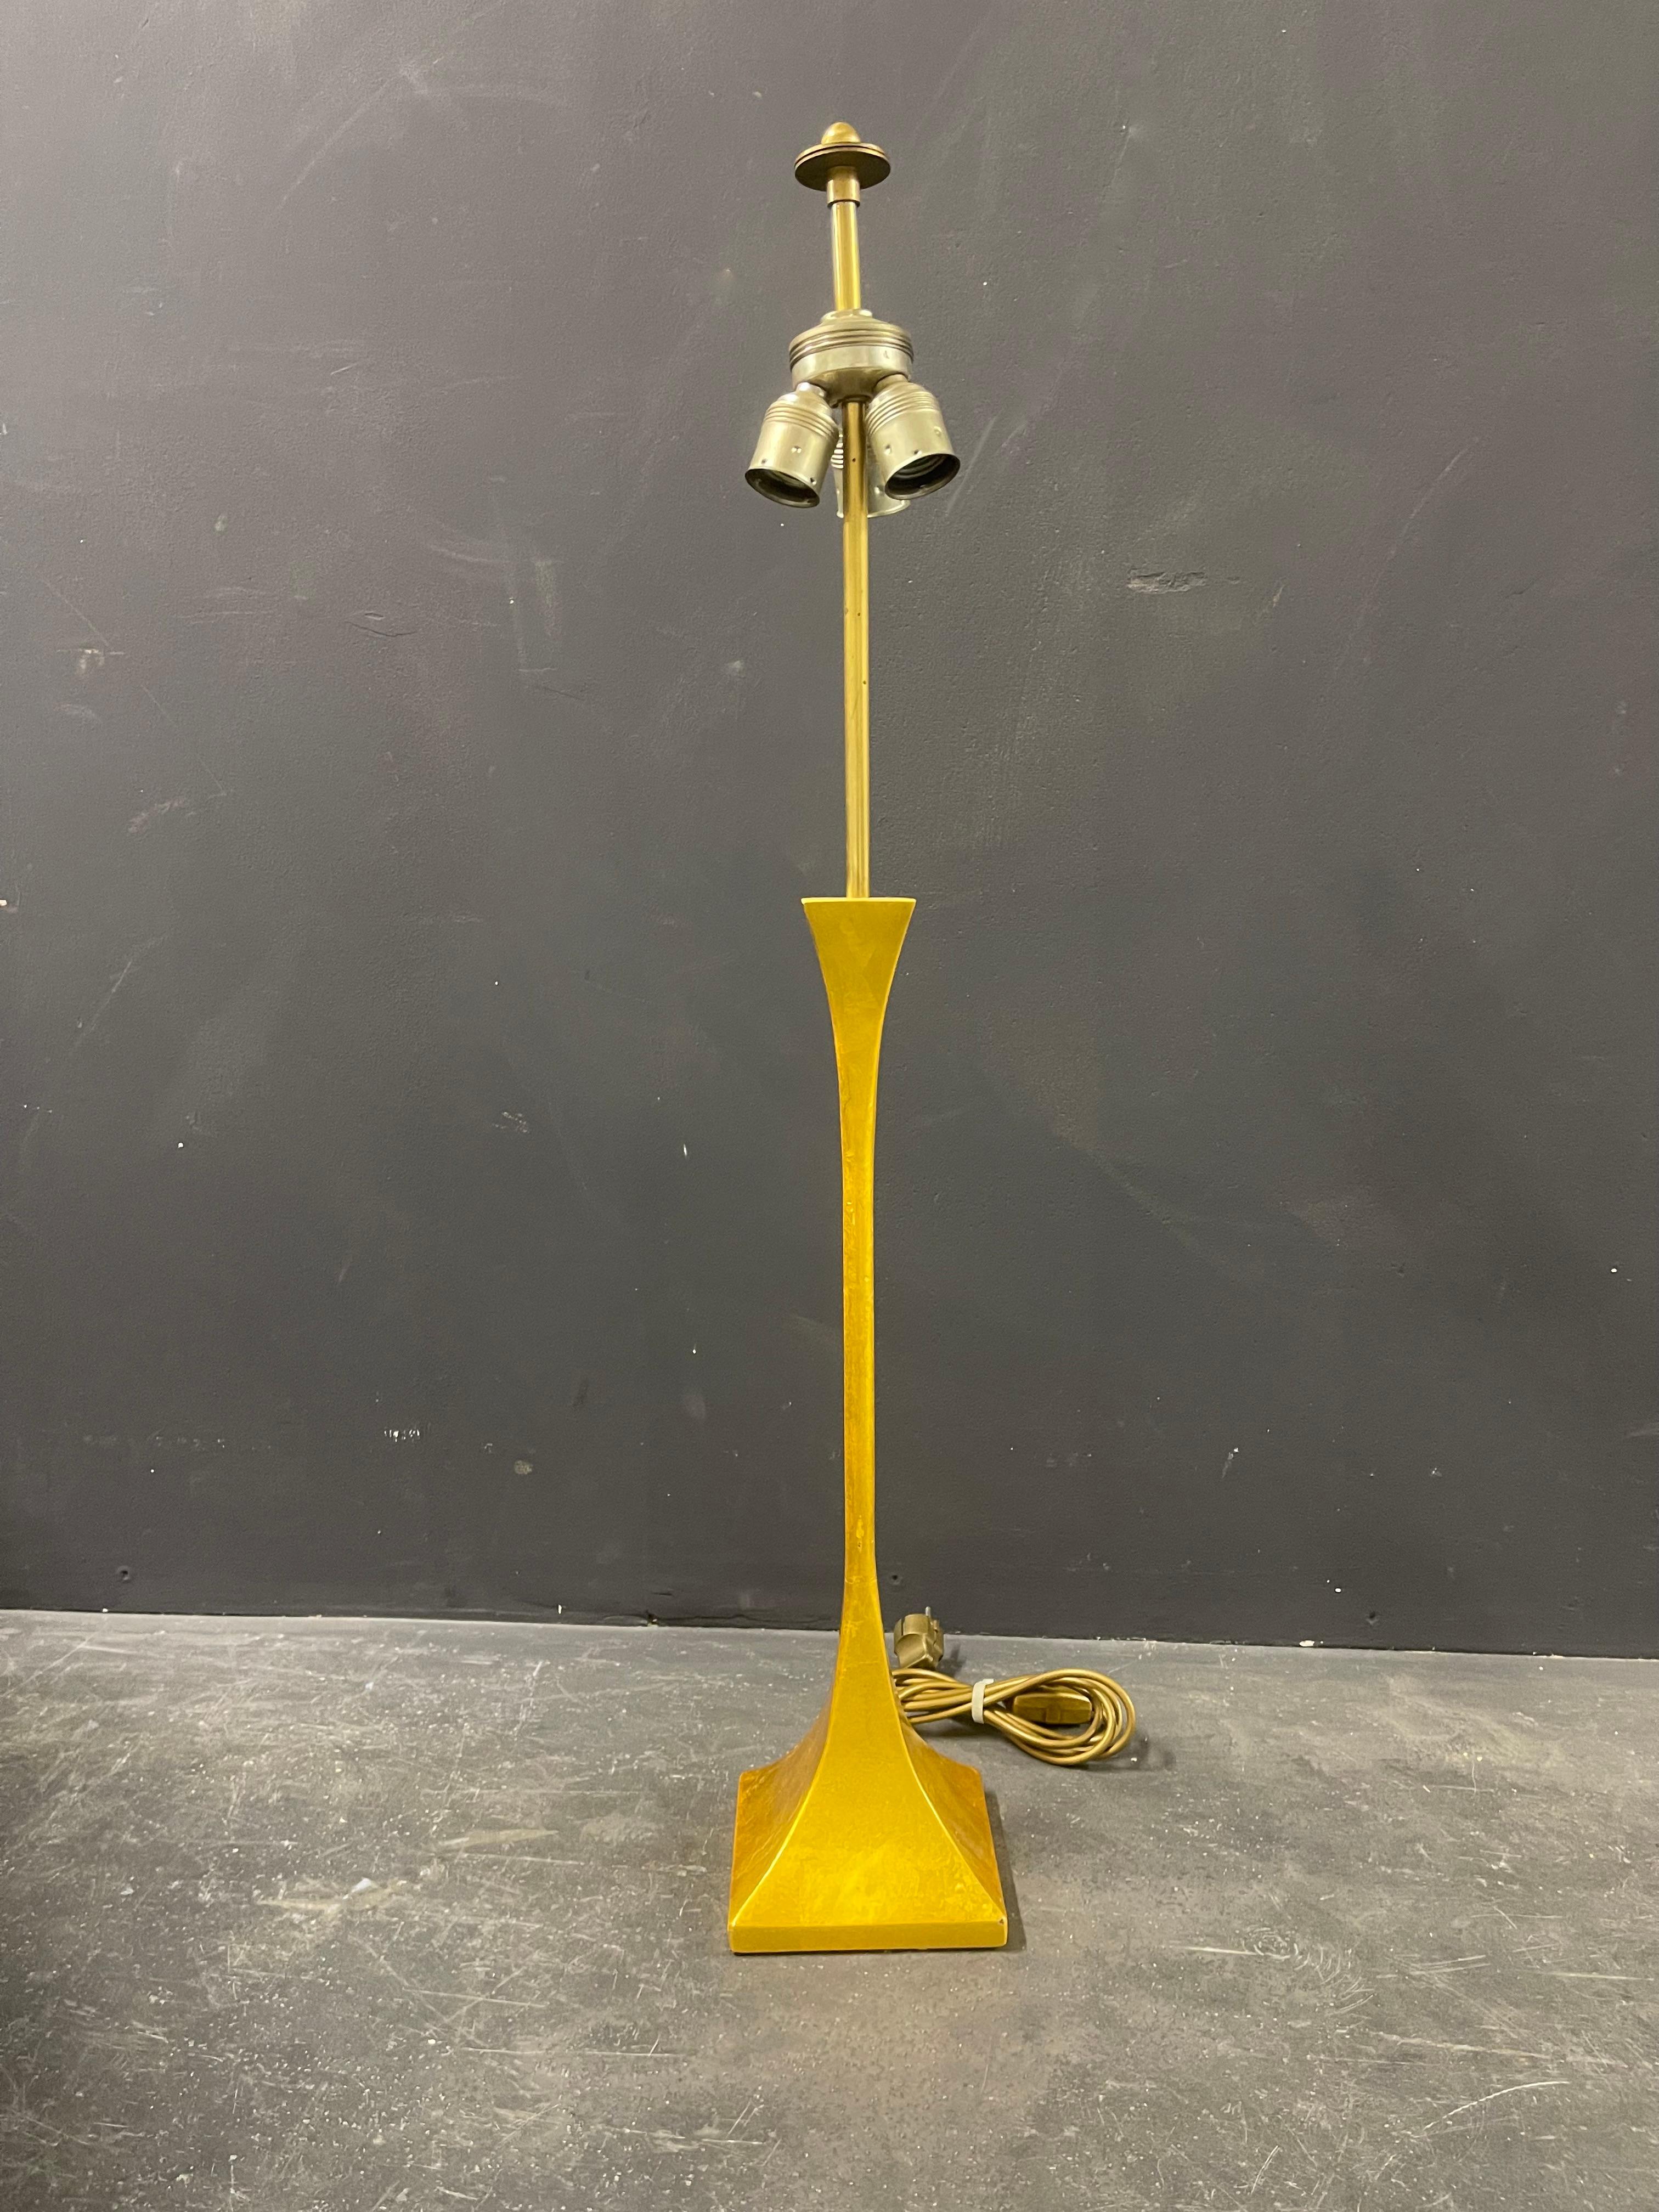 Nice and exclusive vereinigte werkstätten lamp bases professional gilded. And wonderful addition for every Hollywood Regency home. Only the bases are for sale.